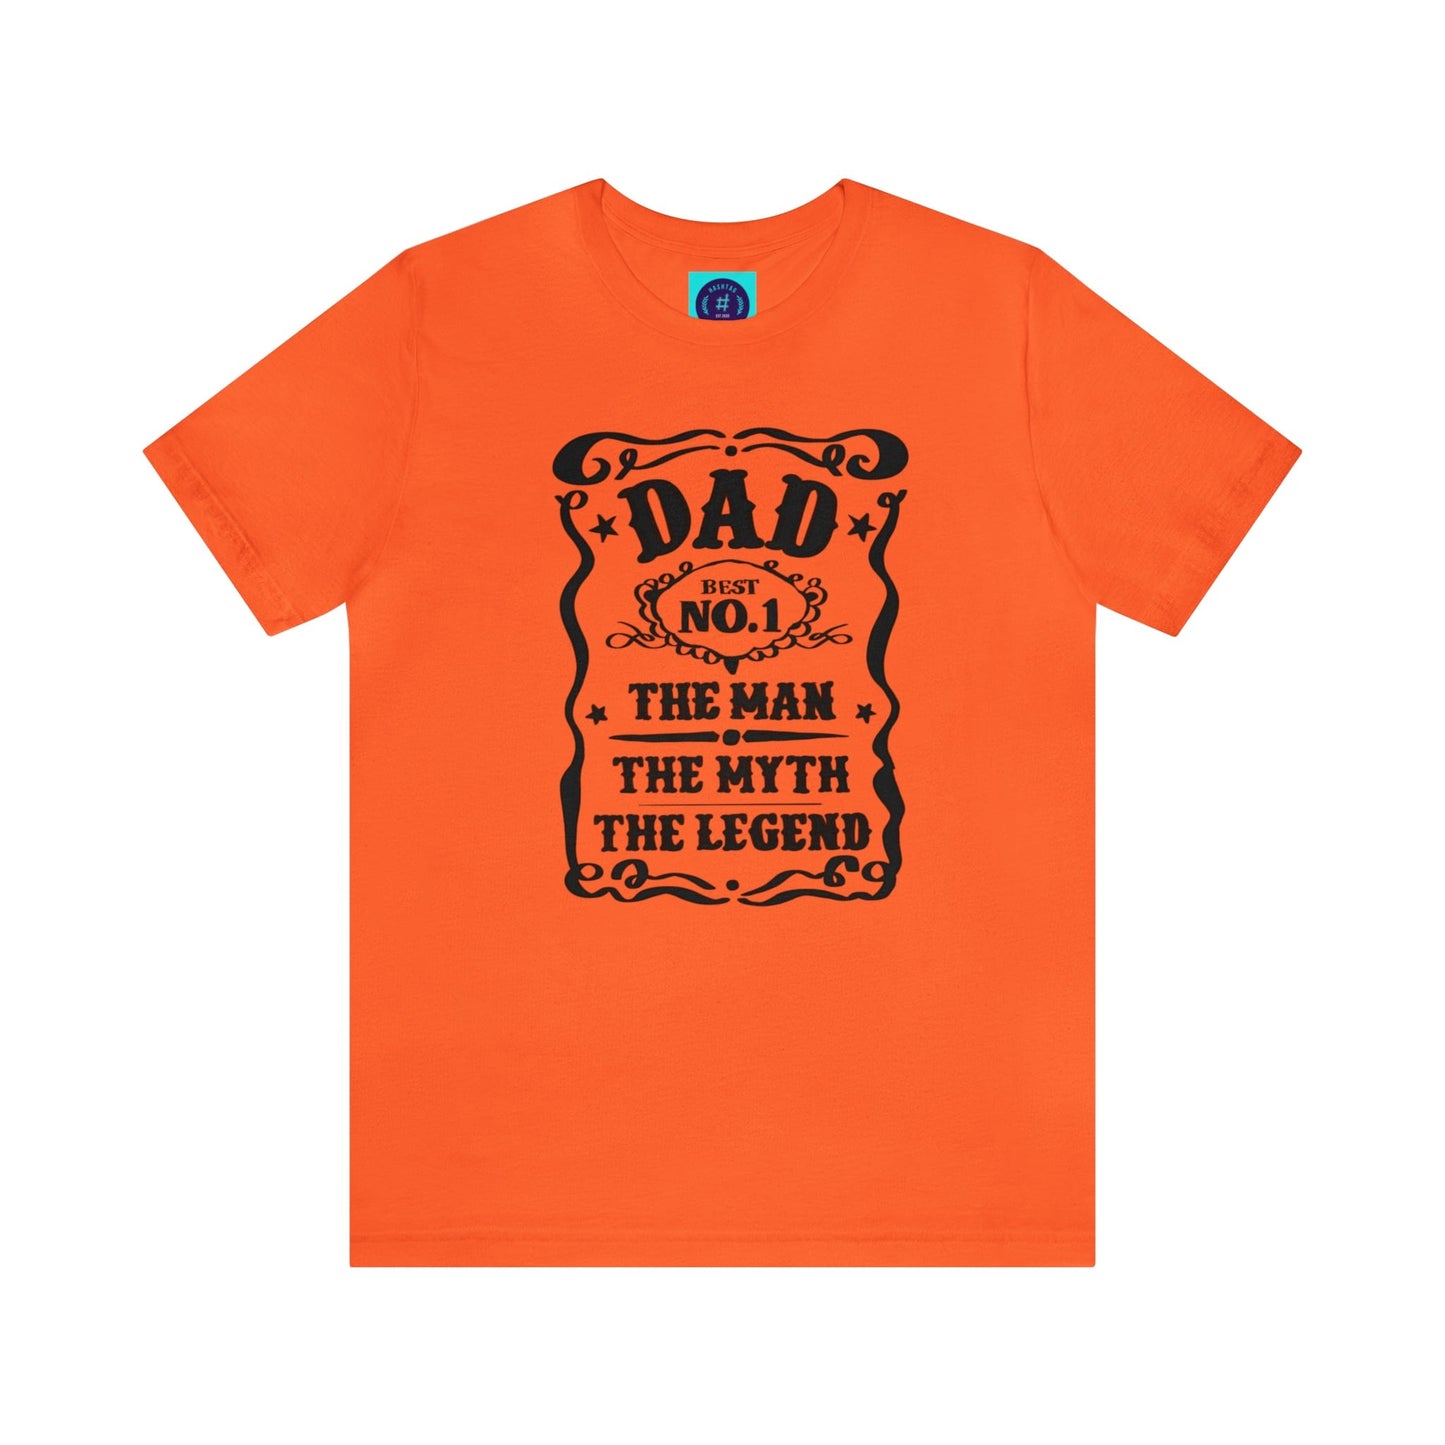 Dad - The Man, Myth, Legend - Father's Day T-Shirt